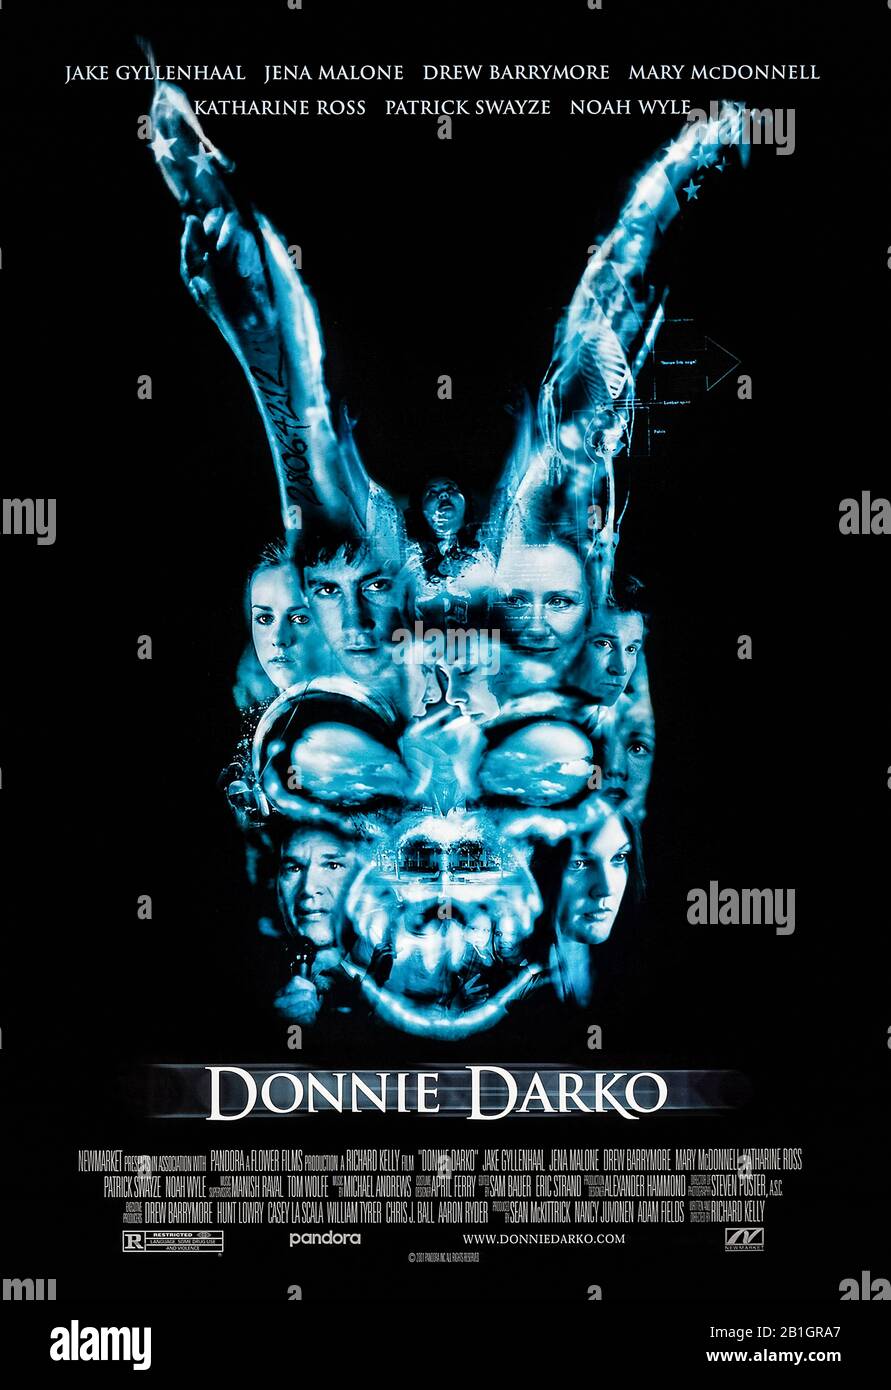 Donnie Darko (2001) directed by Richard Kelly and starring Jake Gyllenhaal, Jena Malone, Mary McDonnell and Patrick Swayze. A teenager has a lucky escape and starts to have visions of a man dressed in a disturbing rabbit costume. Stock Photo